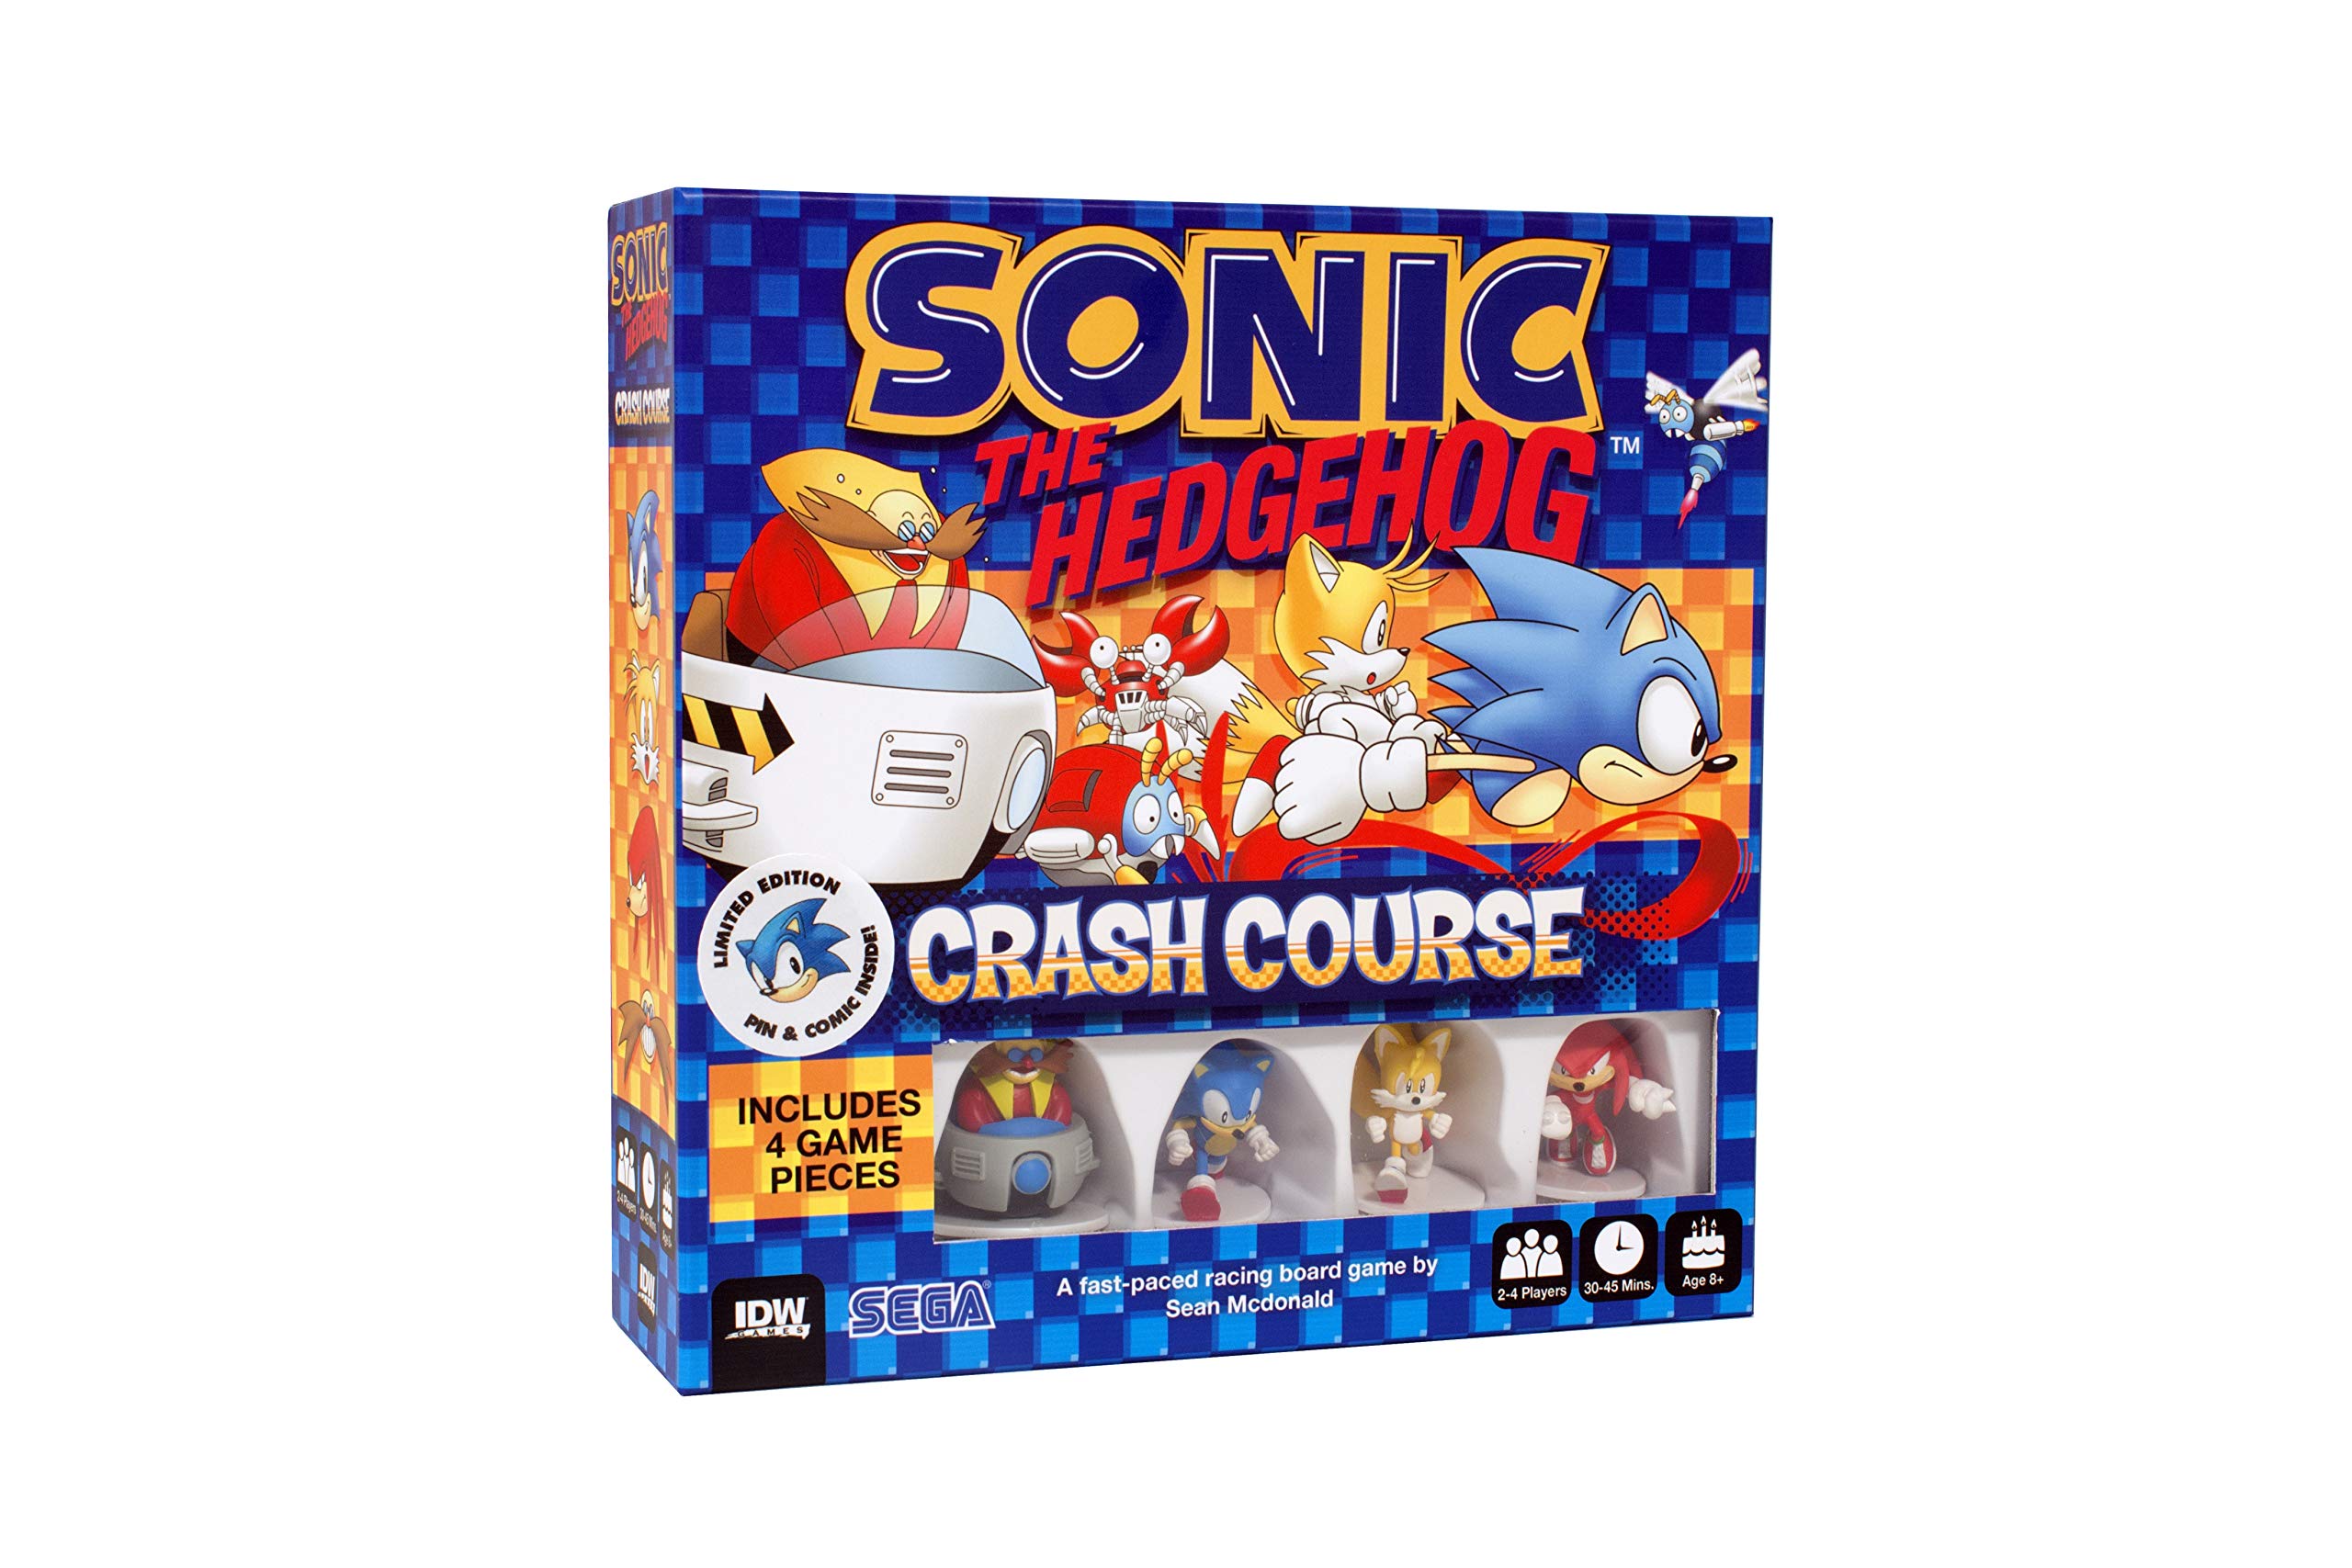 Sonic The Hedgehog Crash Course by IDW Games, Racing Board Game